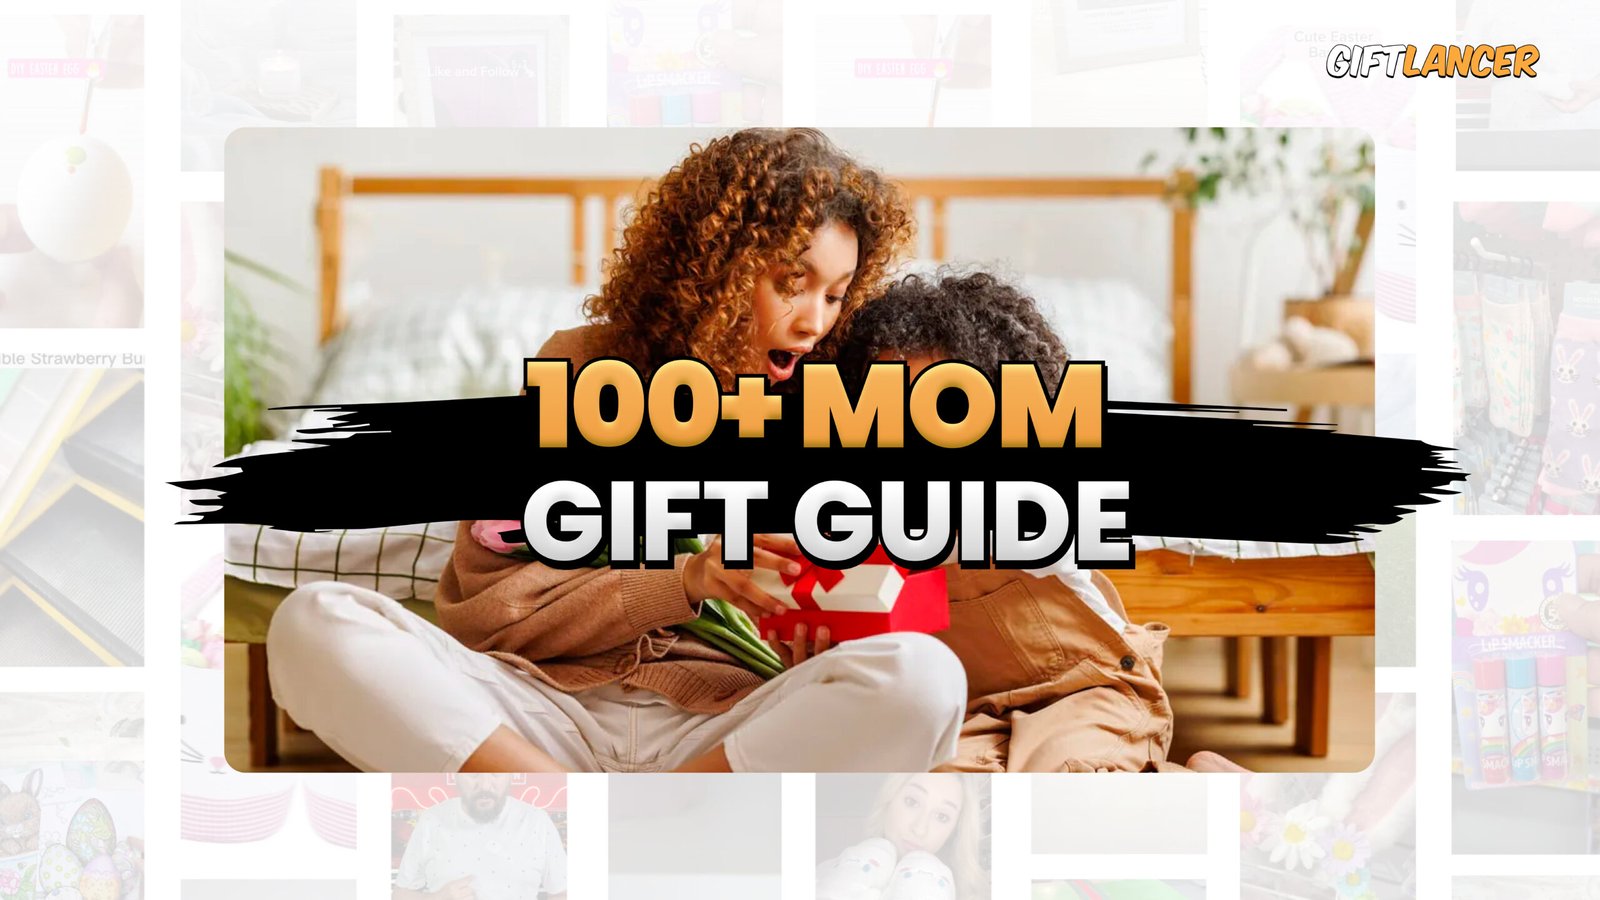 Top 100+ Gift Idea for Mom